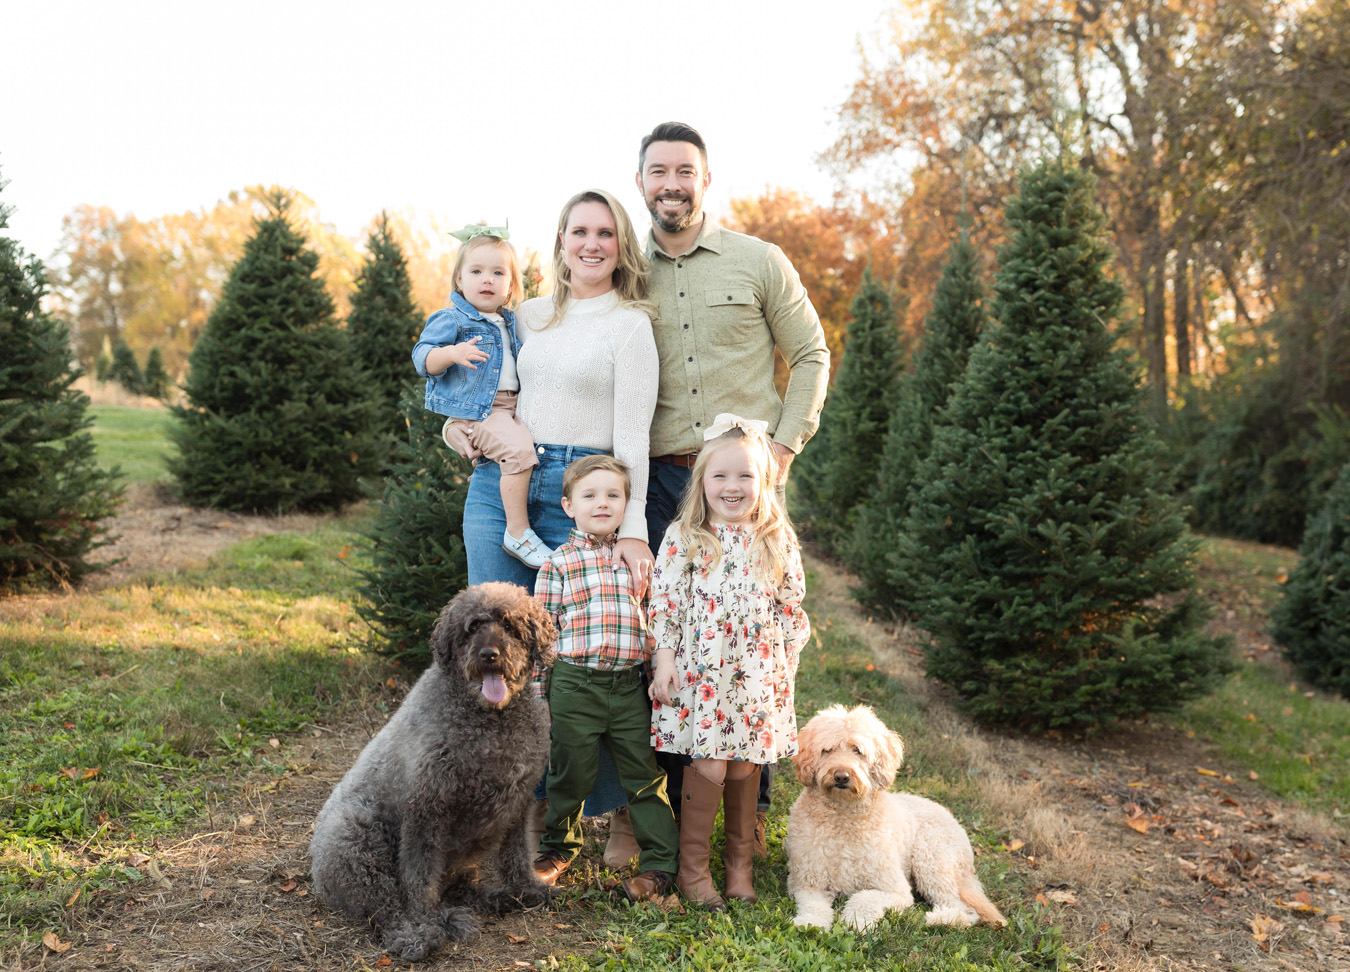 a family session captured by a northern virginia family photographer including a mom, dad, three kids, and two puppies standing in a tree field